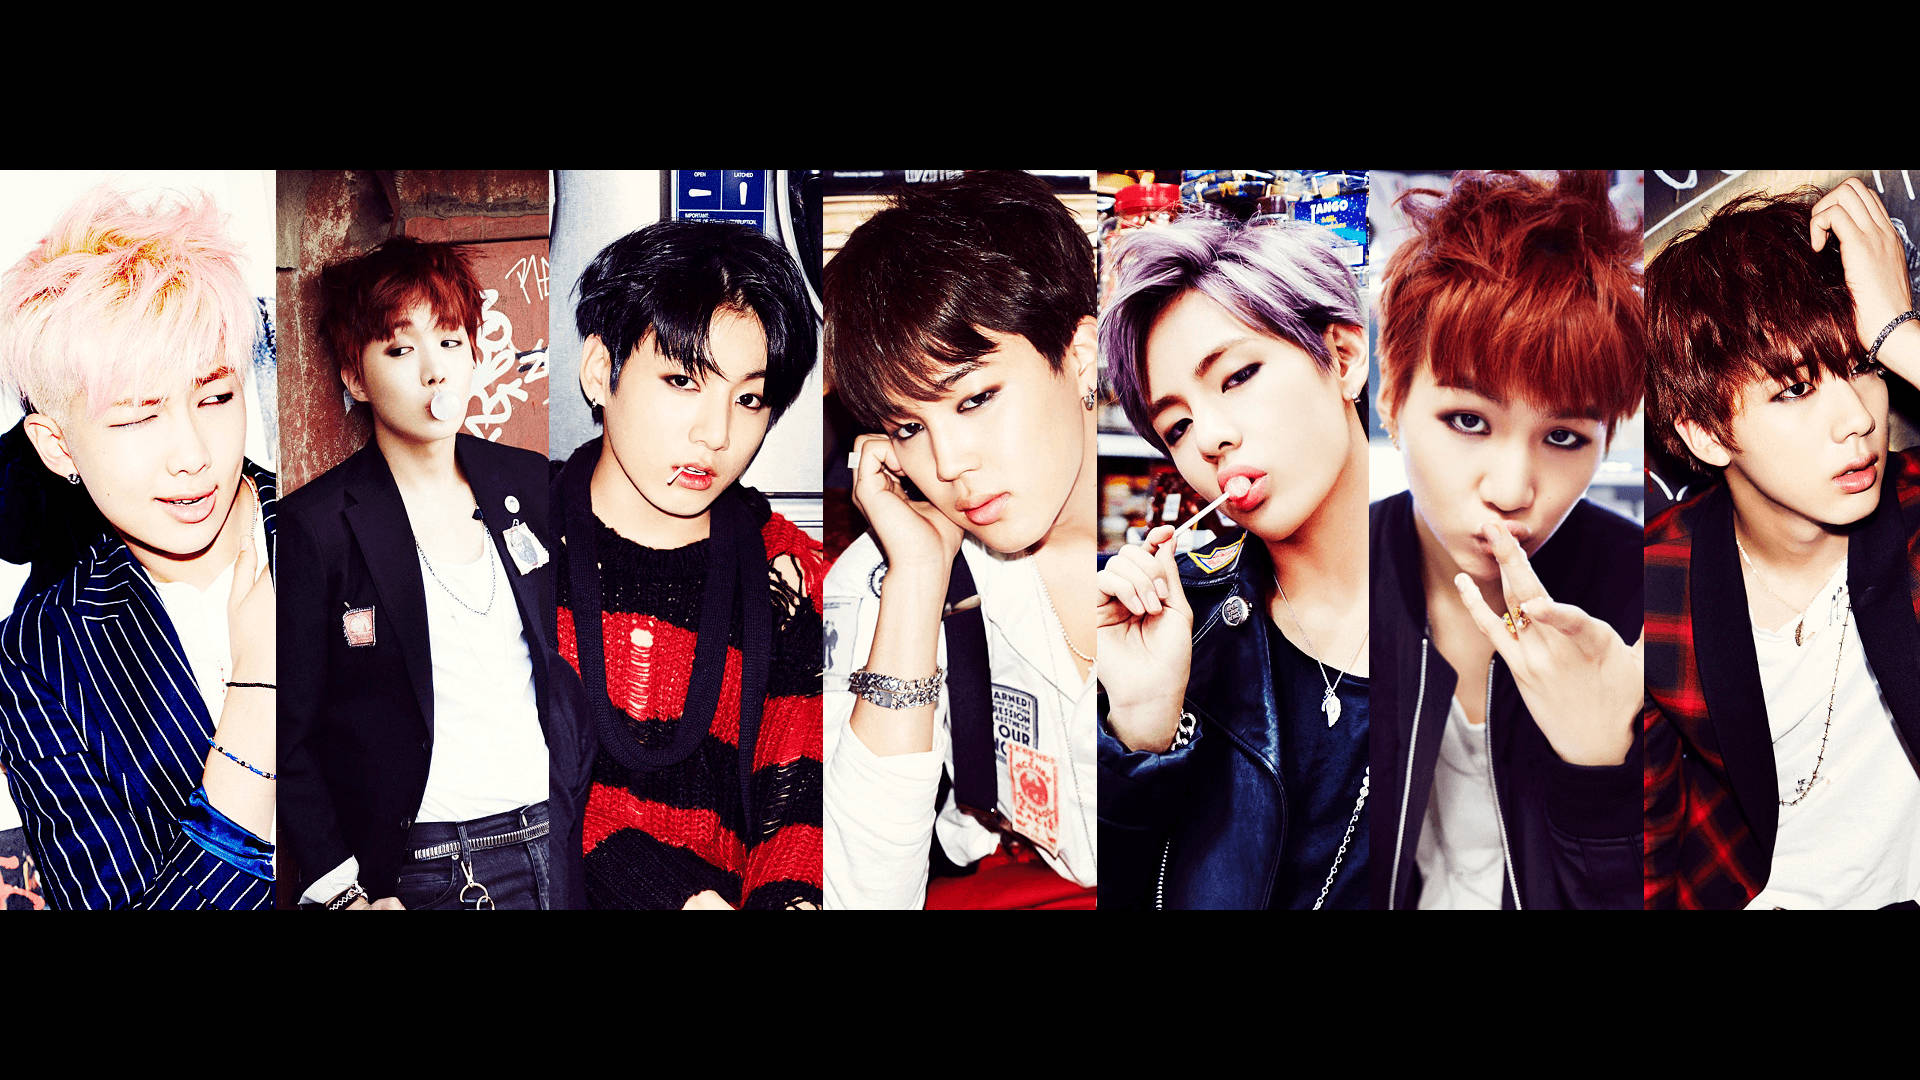 Cute Bts Group Aesthetic Image Collage Wallpaper